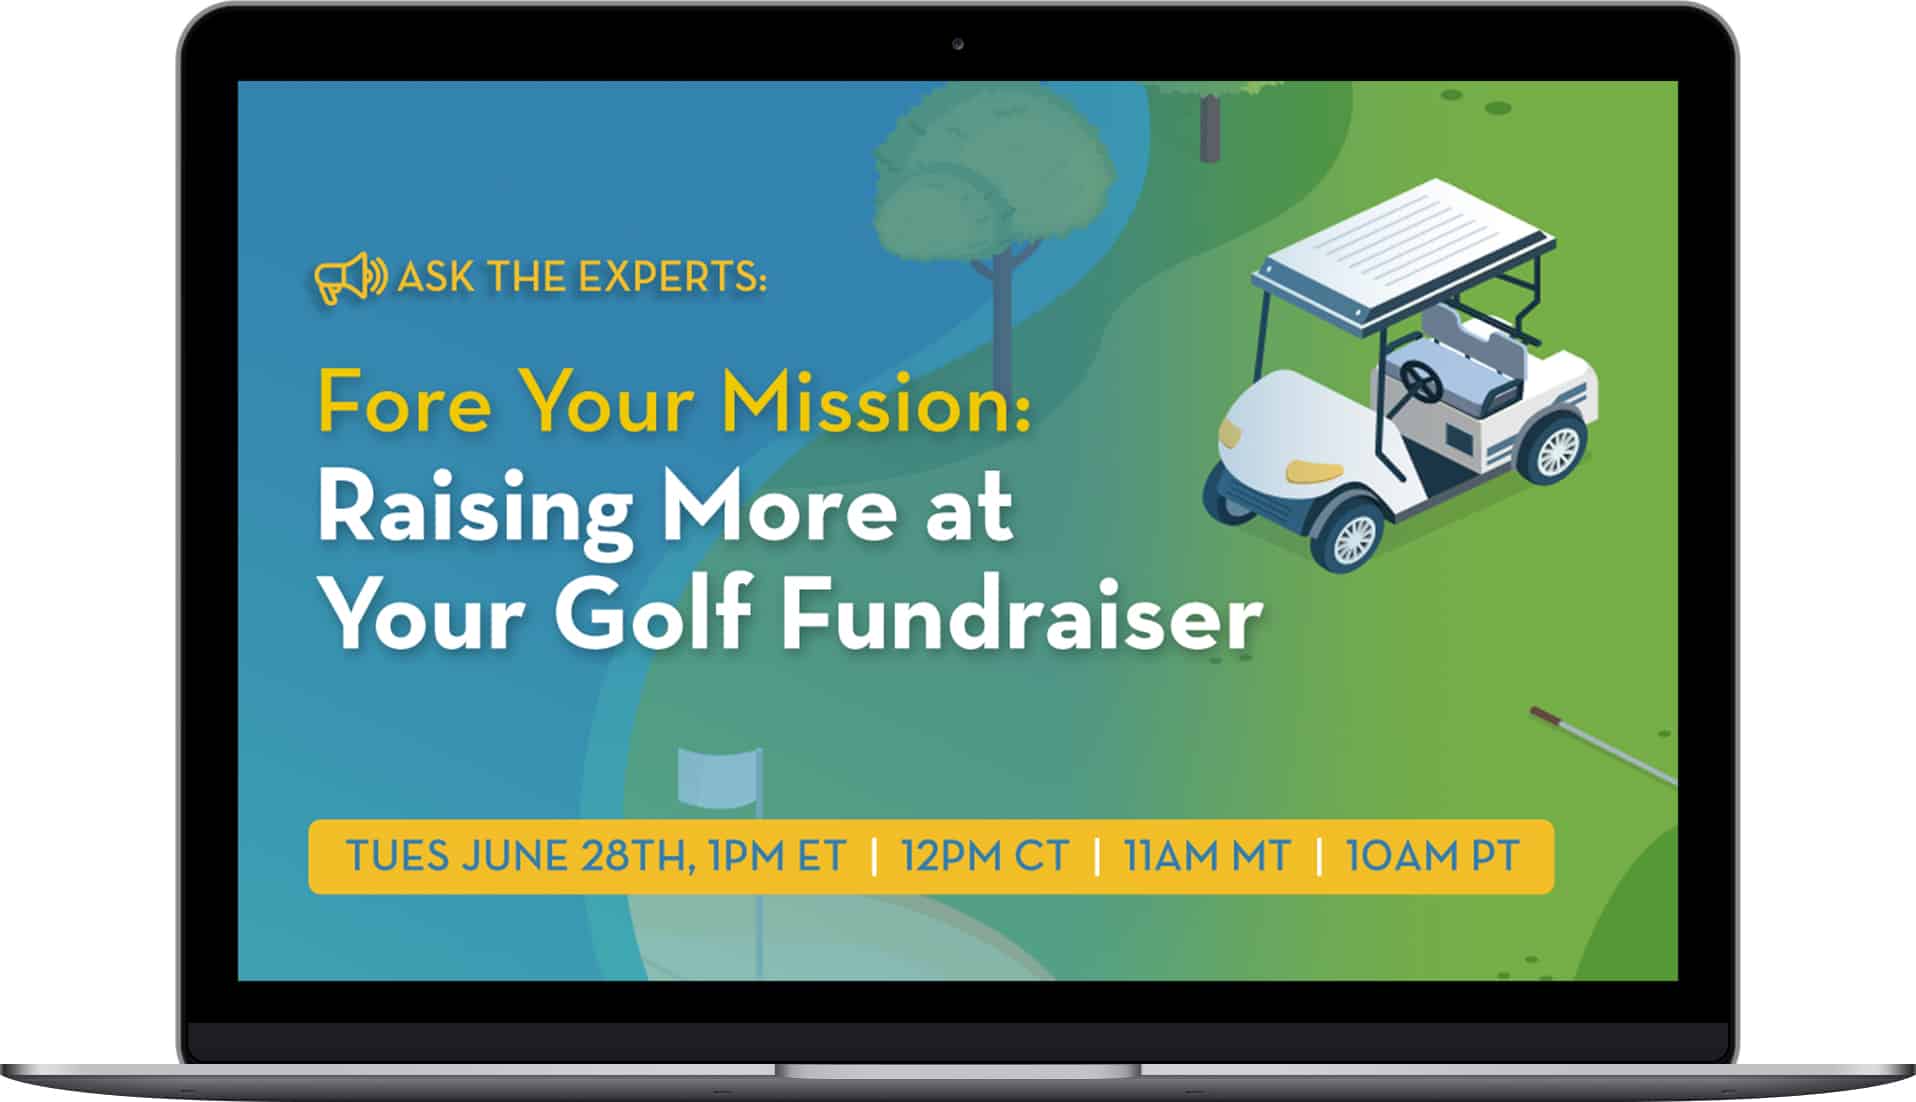 Ask the Experts - Fore Your Mission: Raising More at Your Golf Fundraiser